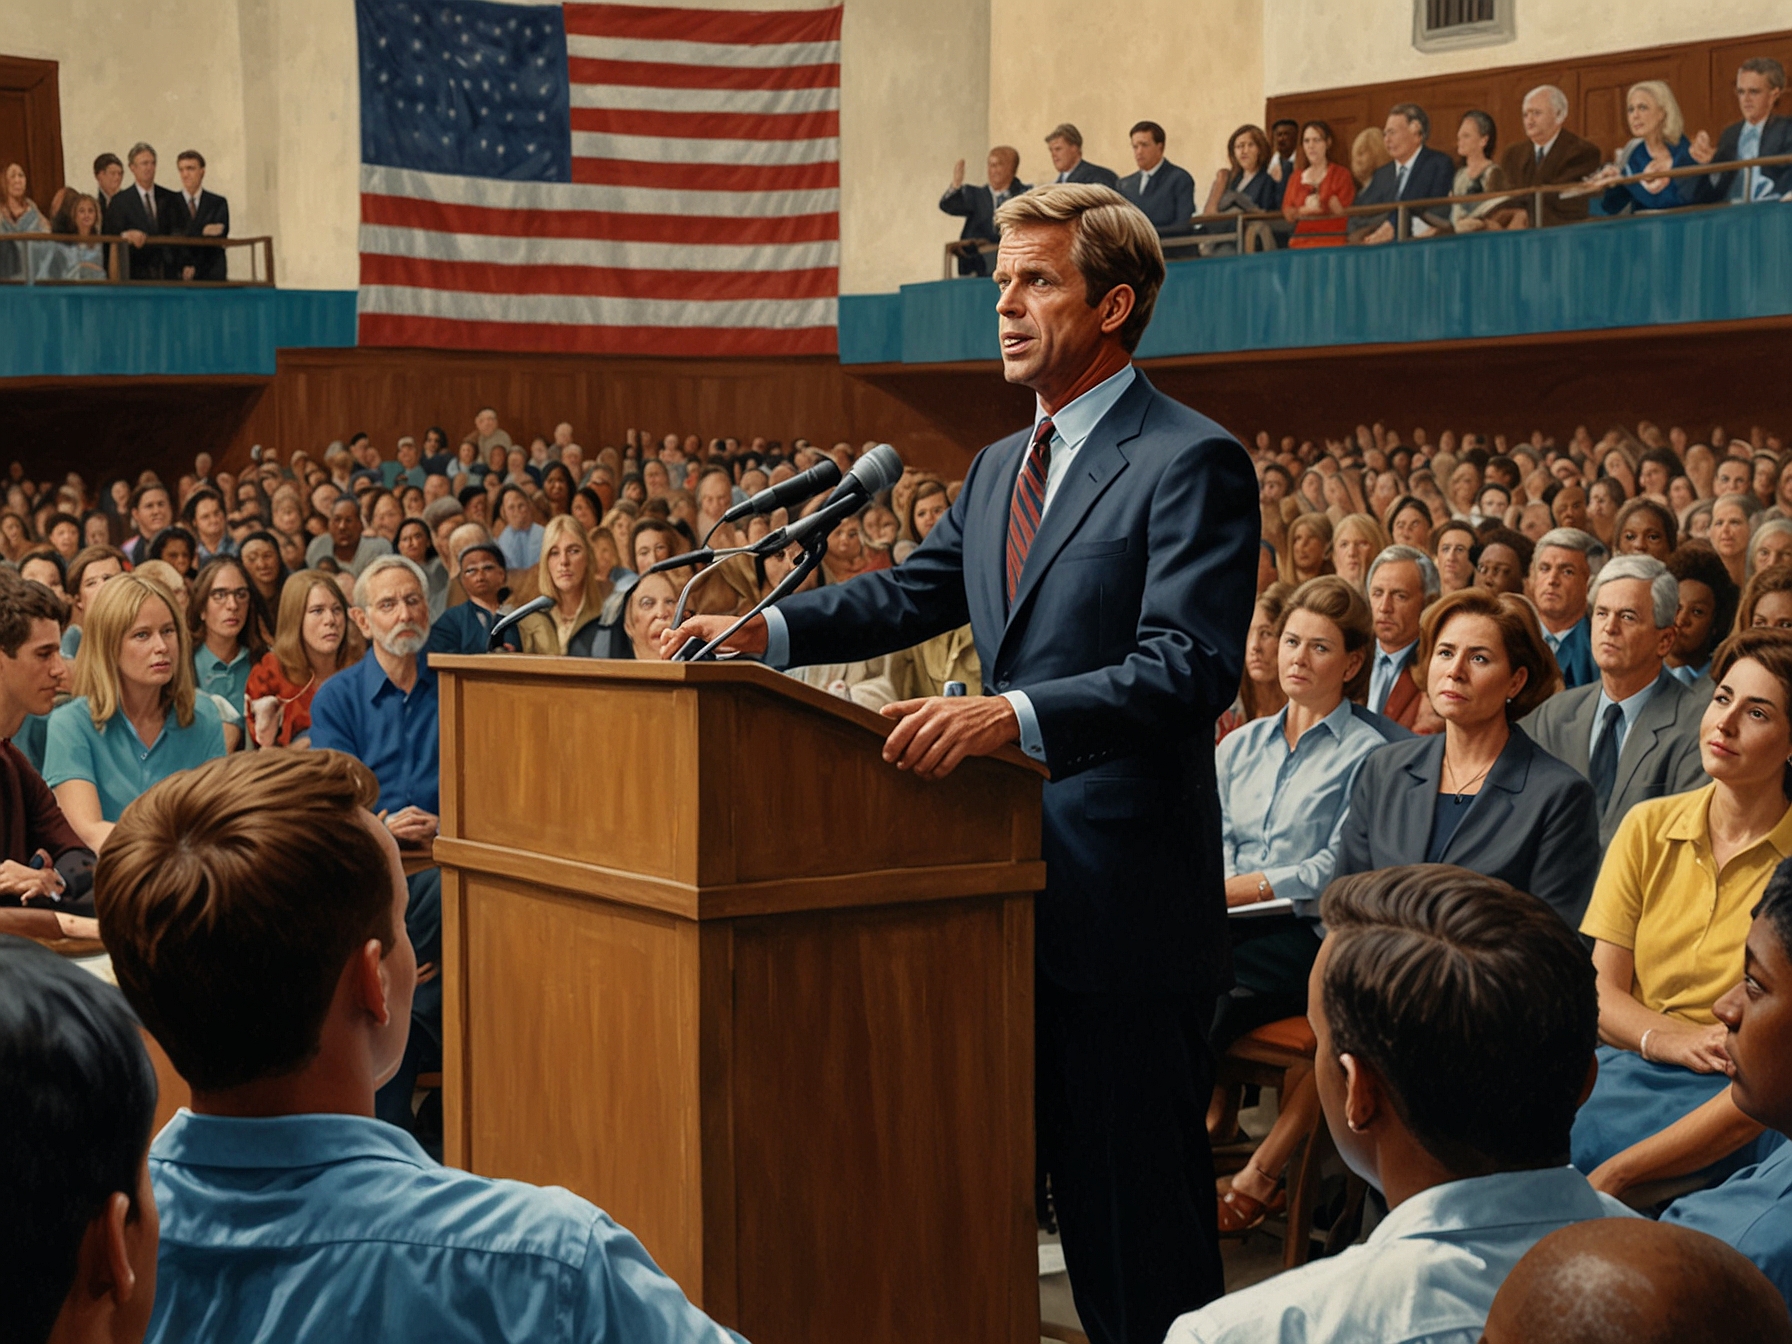 Robert F. Kennedy Jr. addressing a diverse group of voters at a town hall meeting, emphasizing his commitment to giving a voice to disenfranchised communities and promoting unity.